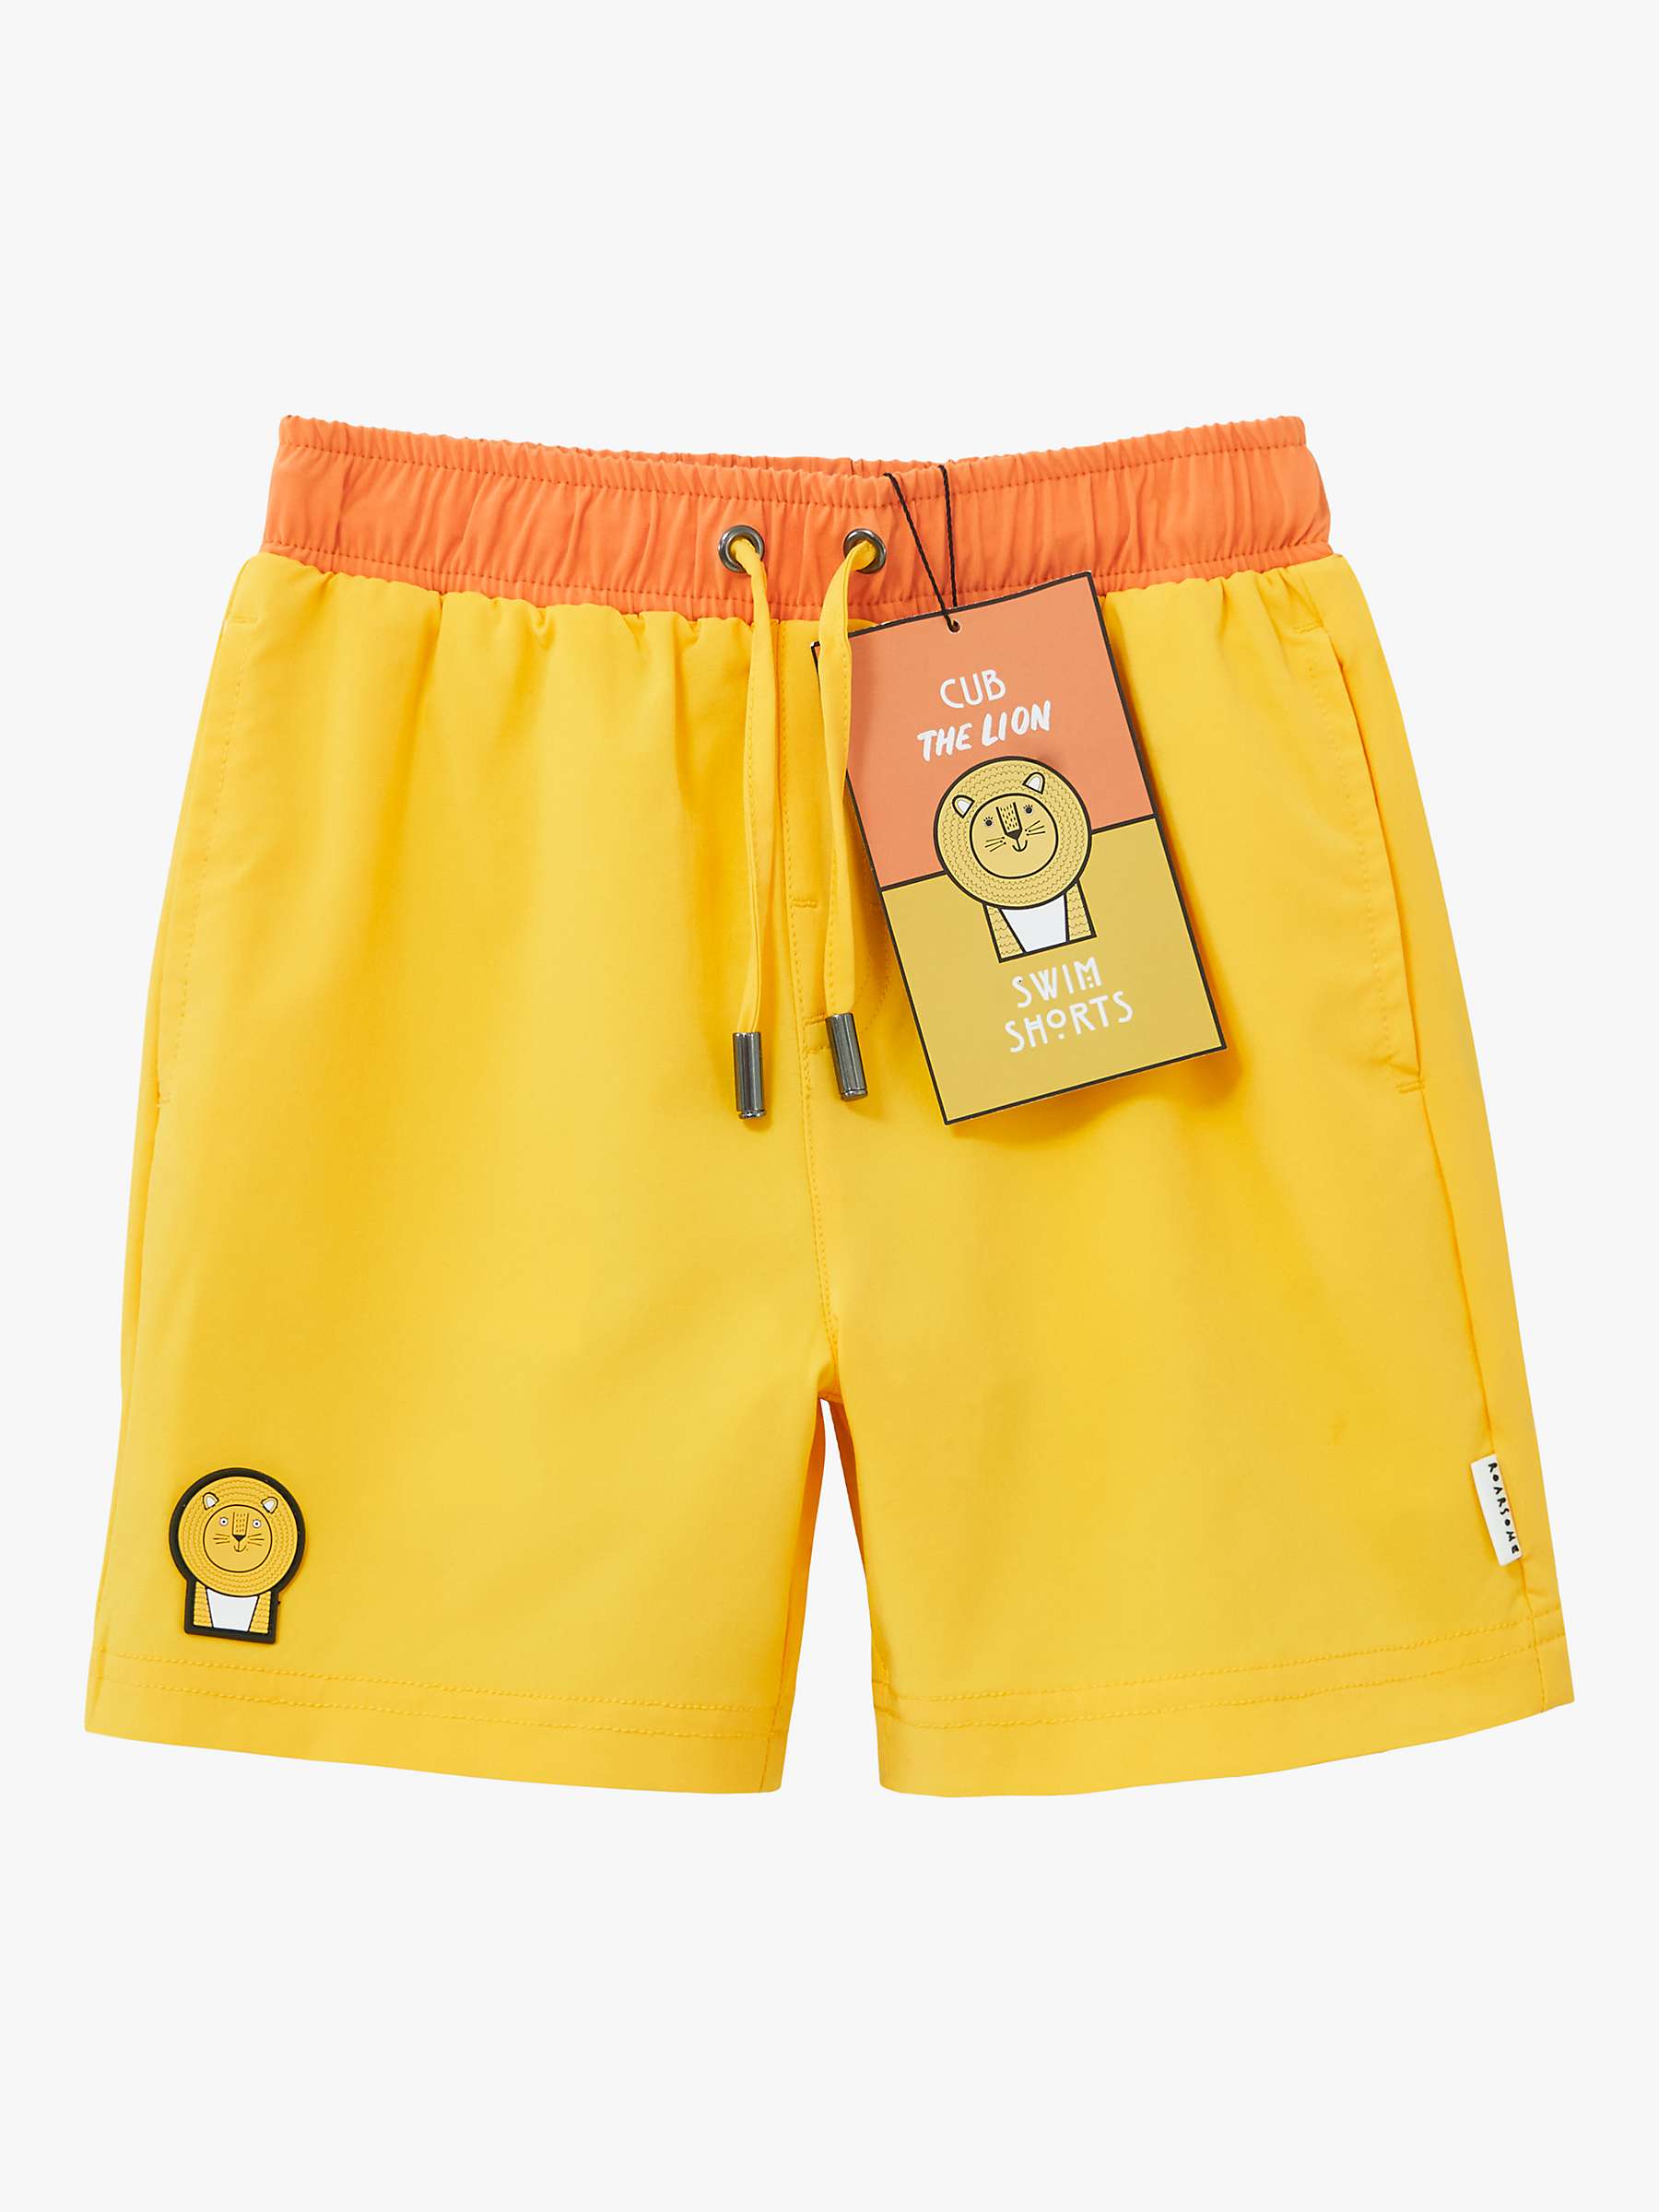 Buy Roarsome Kids' Cub The Lion Swim Shorts, Mid Yellow Online at johnlewis.com